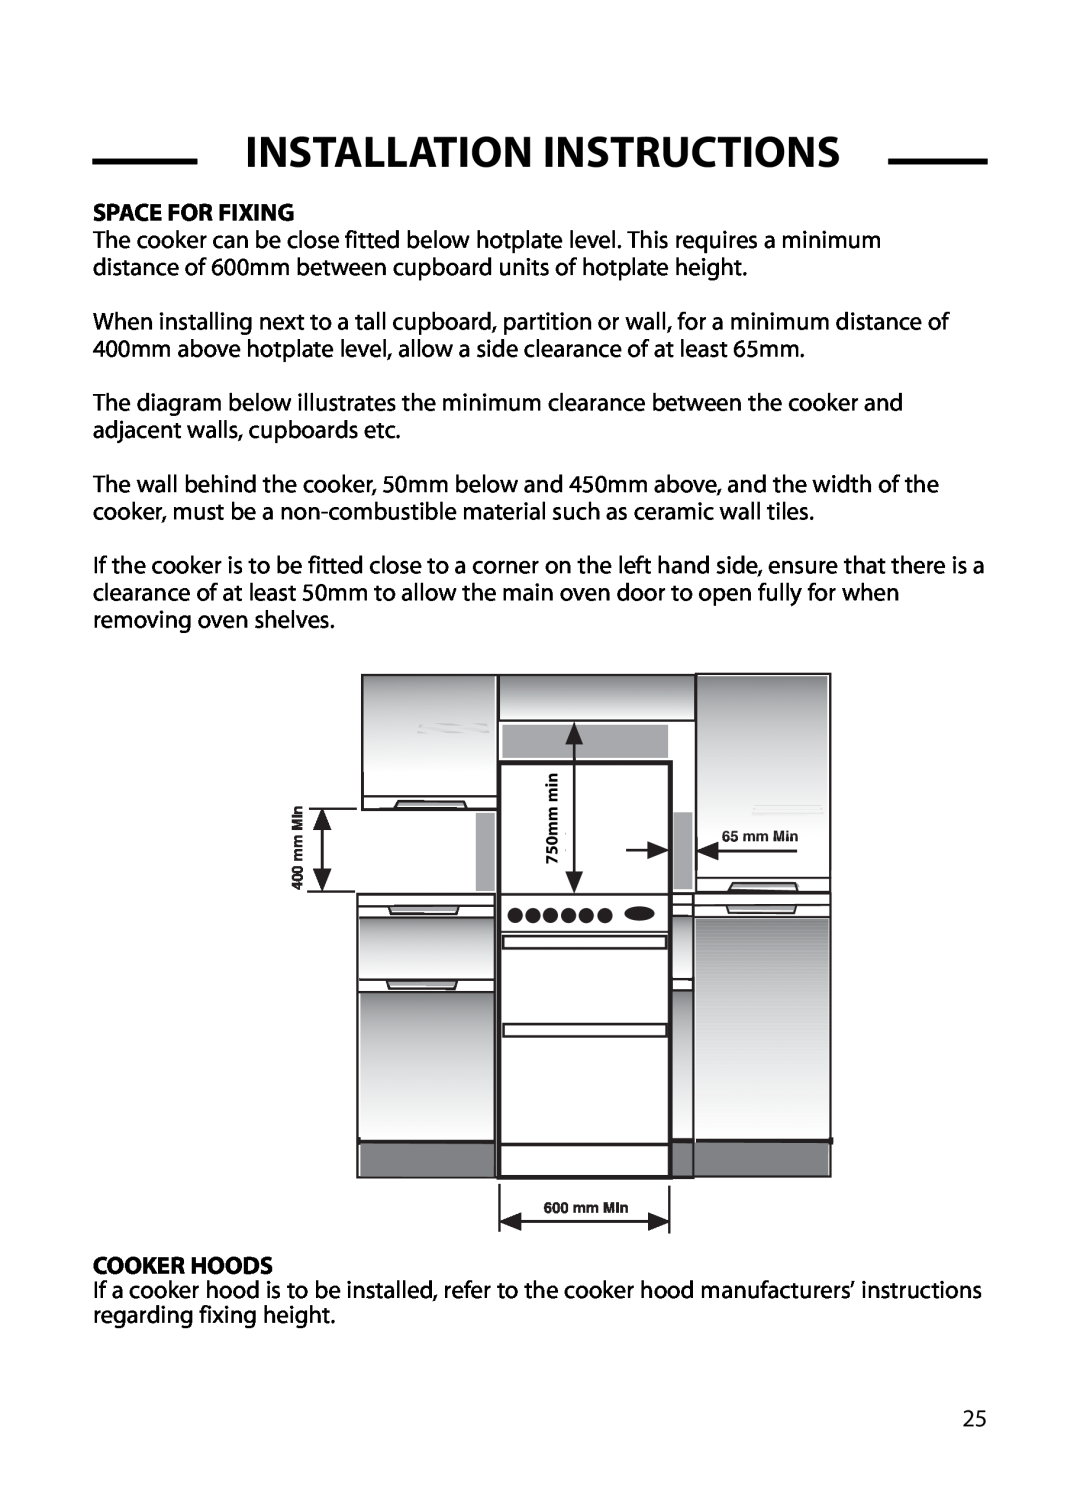 Cannon C60DH installation instructions Space For Fixing, Cooker Hoods, Installation Instructions, 750mm 